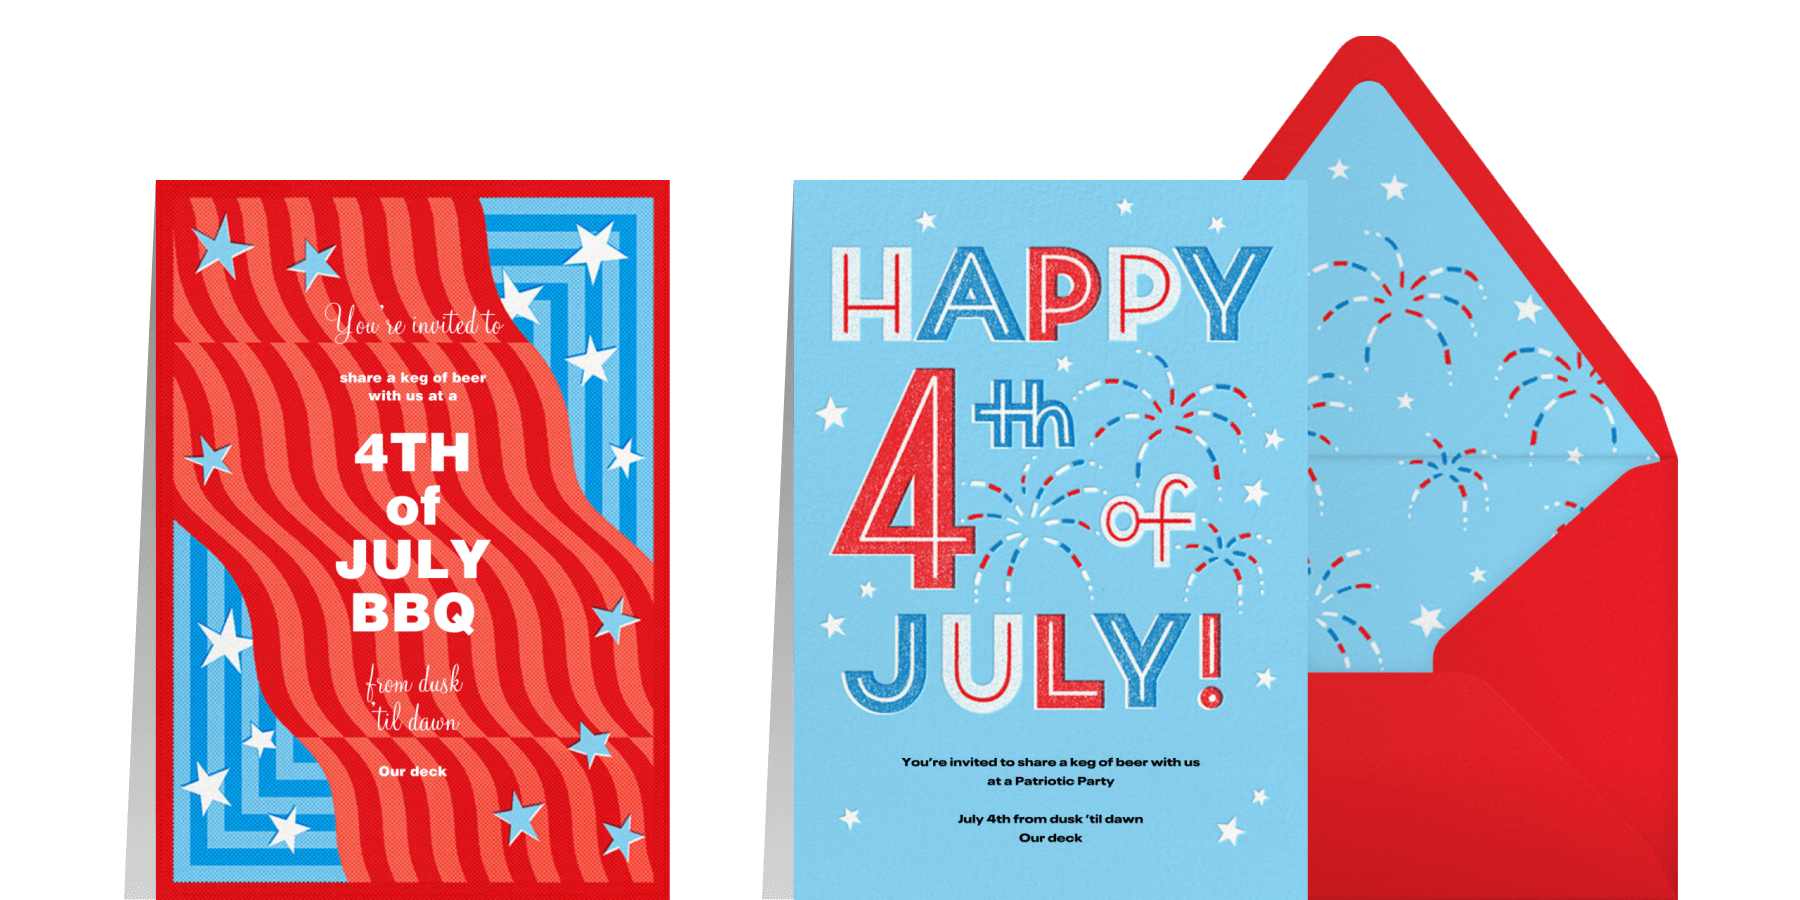 Two 4th of July invitations sitting side by side